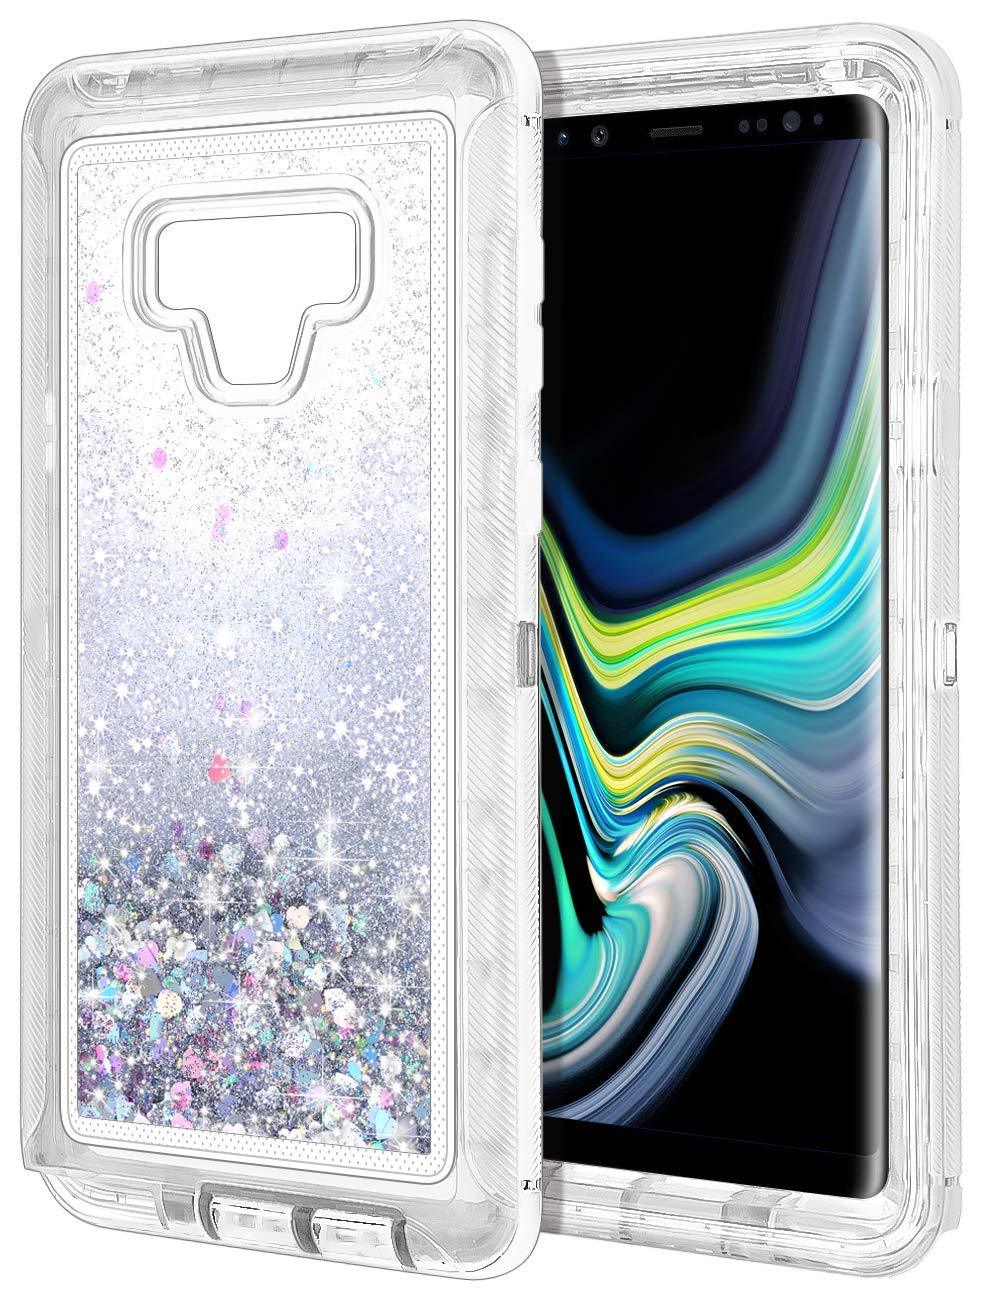 Galaxy Note 9 Star Dust Quick Stand Clear Armor Robot Case (Silver)